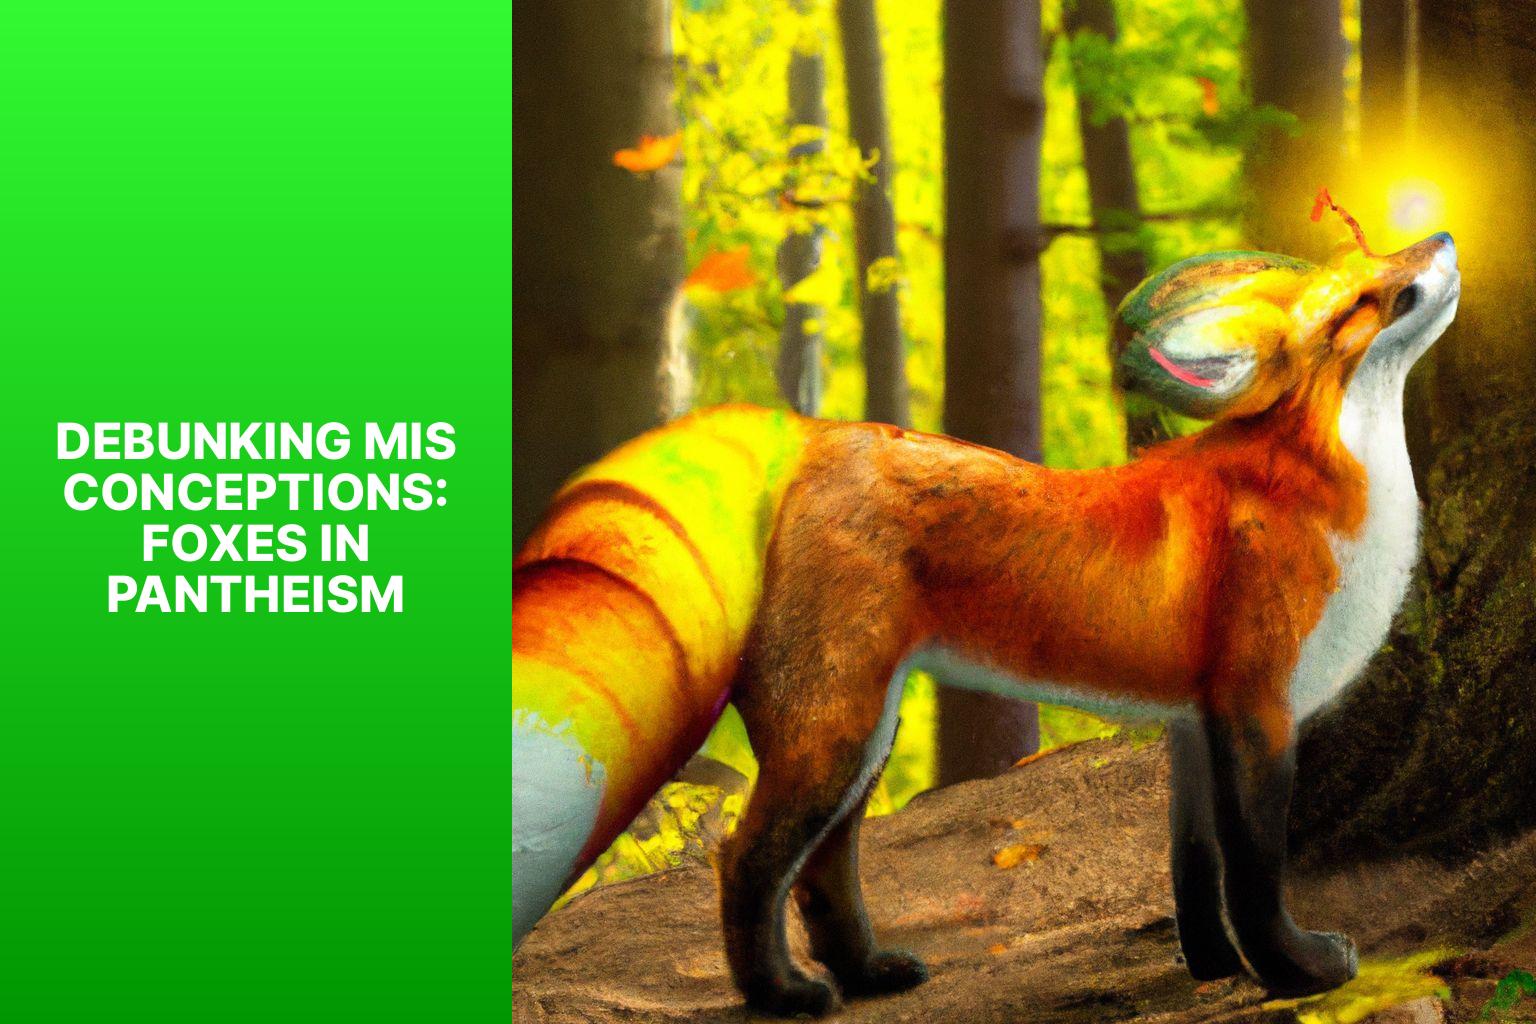 Debunking Misconceptions: Foxes in Pantheism - Fox Myths in Pantheism 